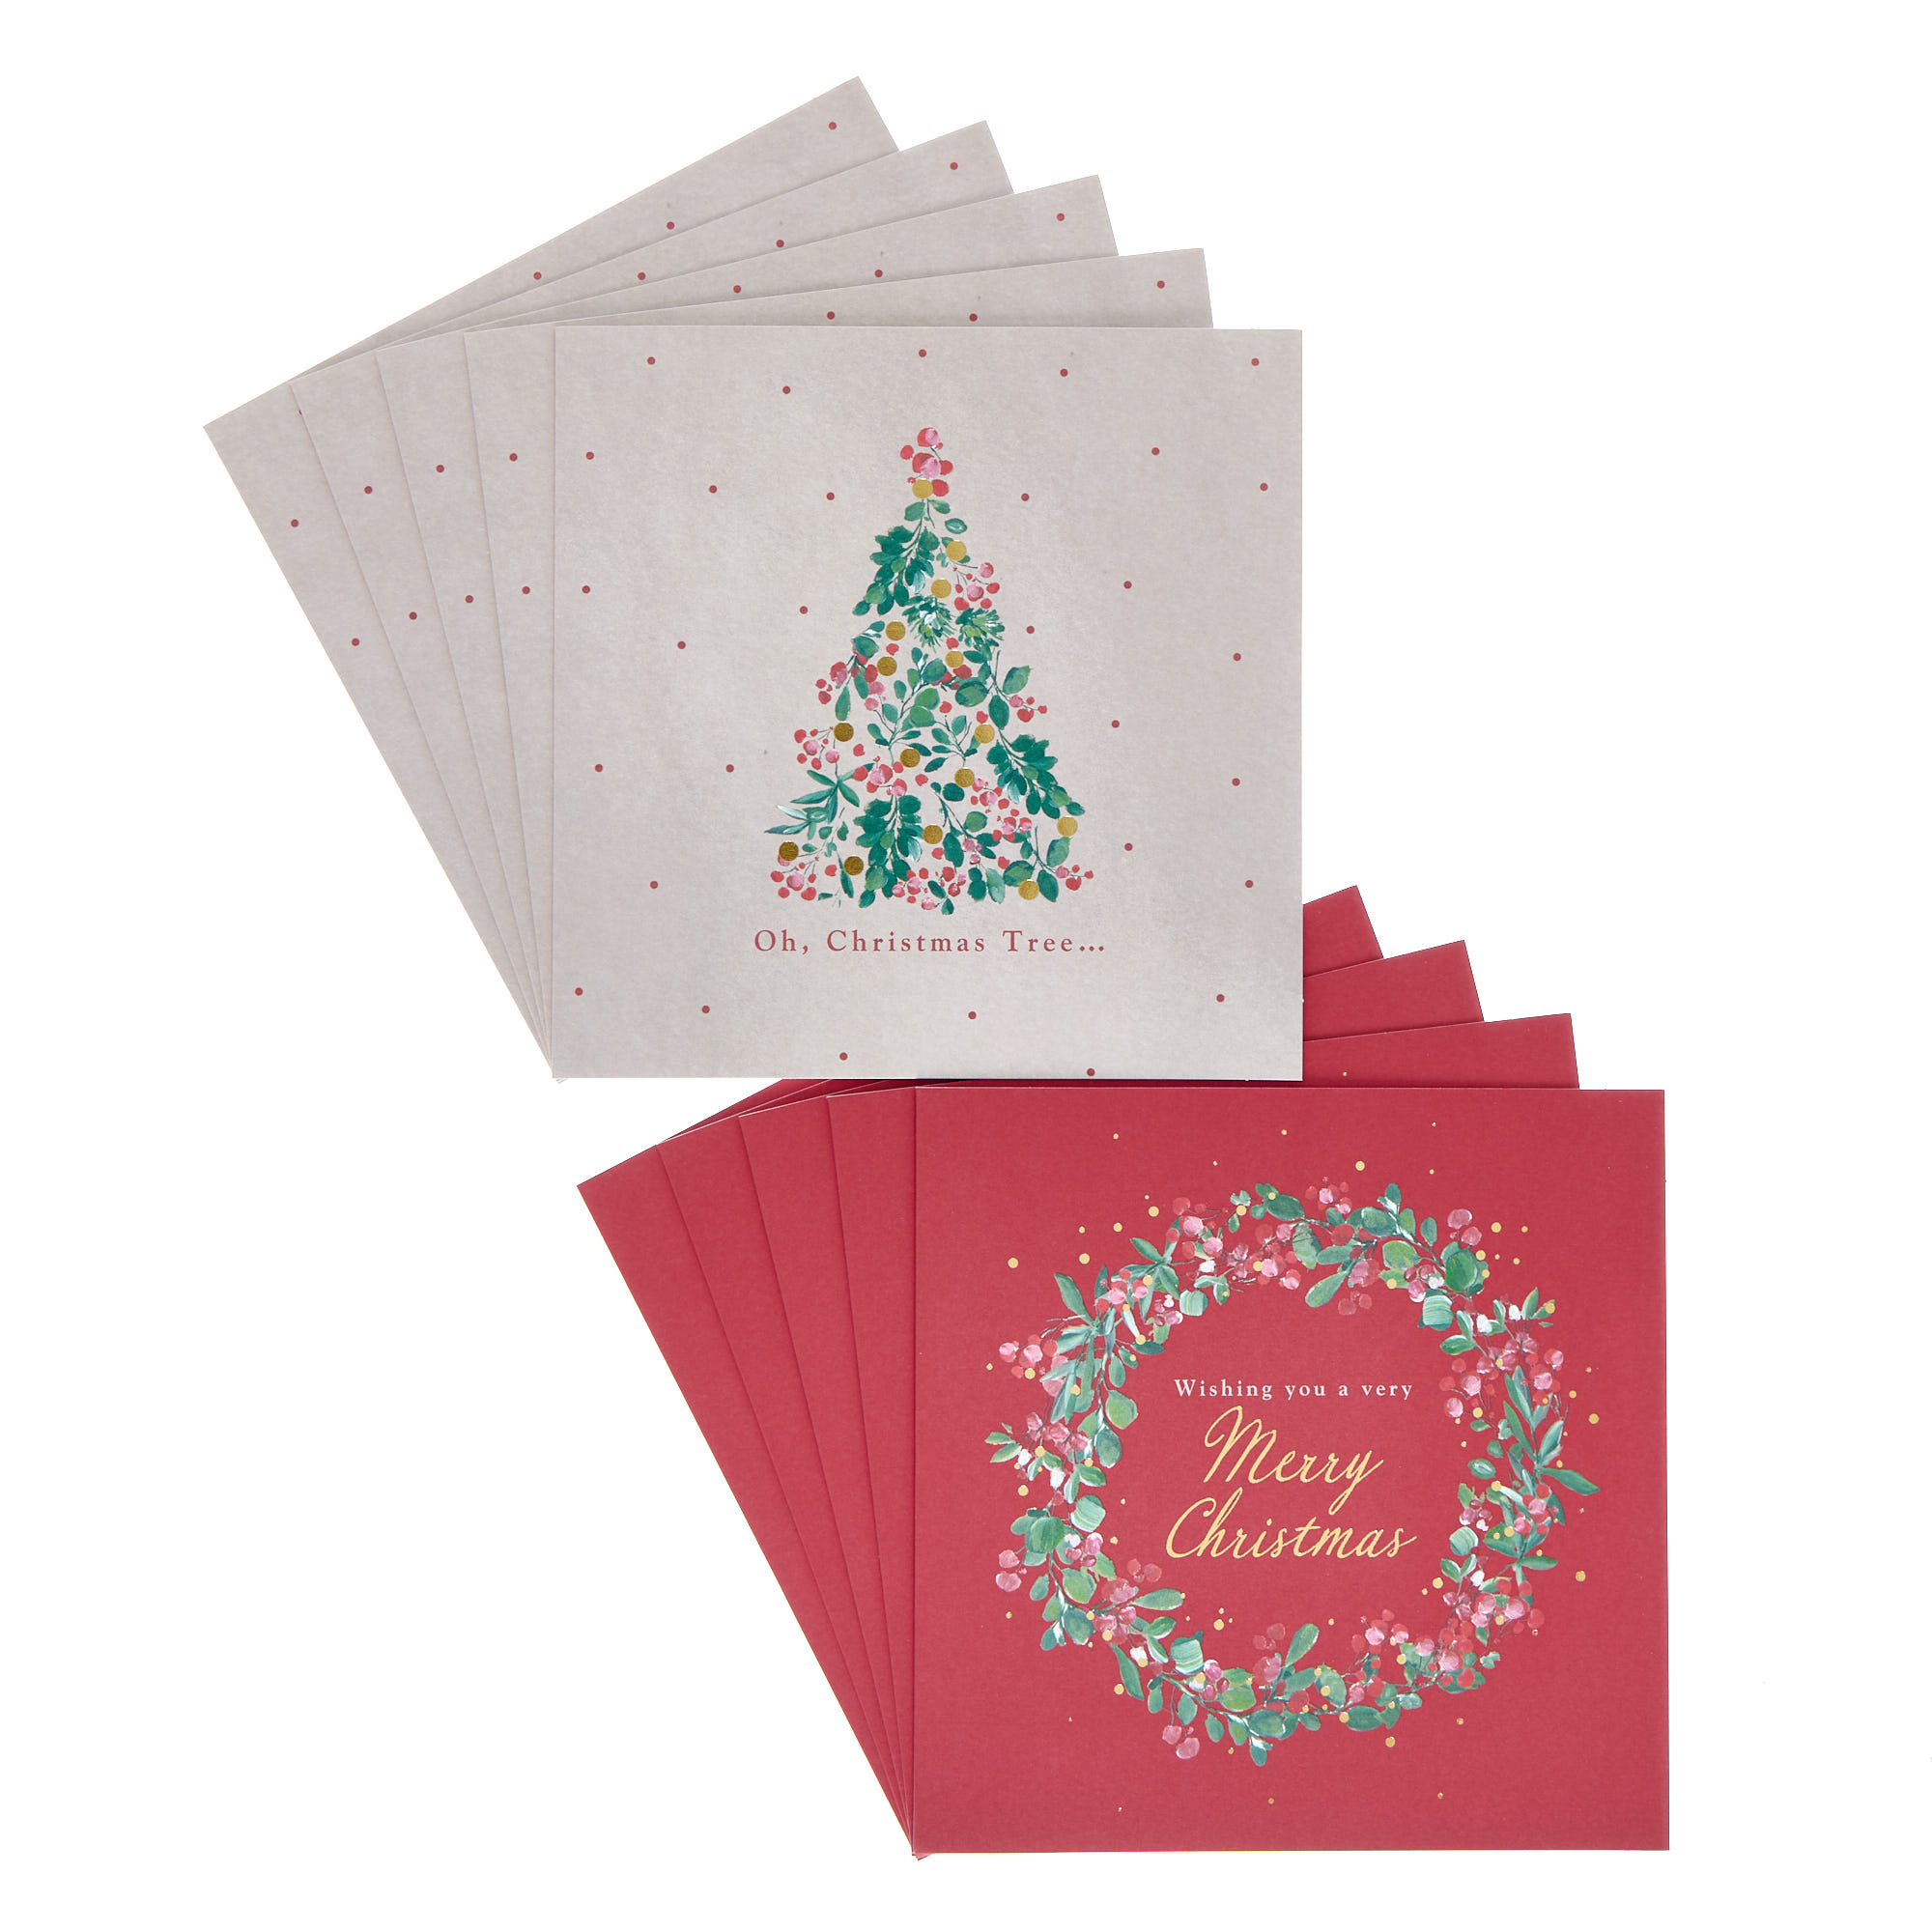 16 Charity Christmas Cards - Tree & Wreath (2 Designs)